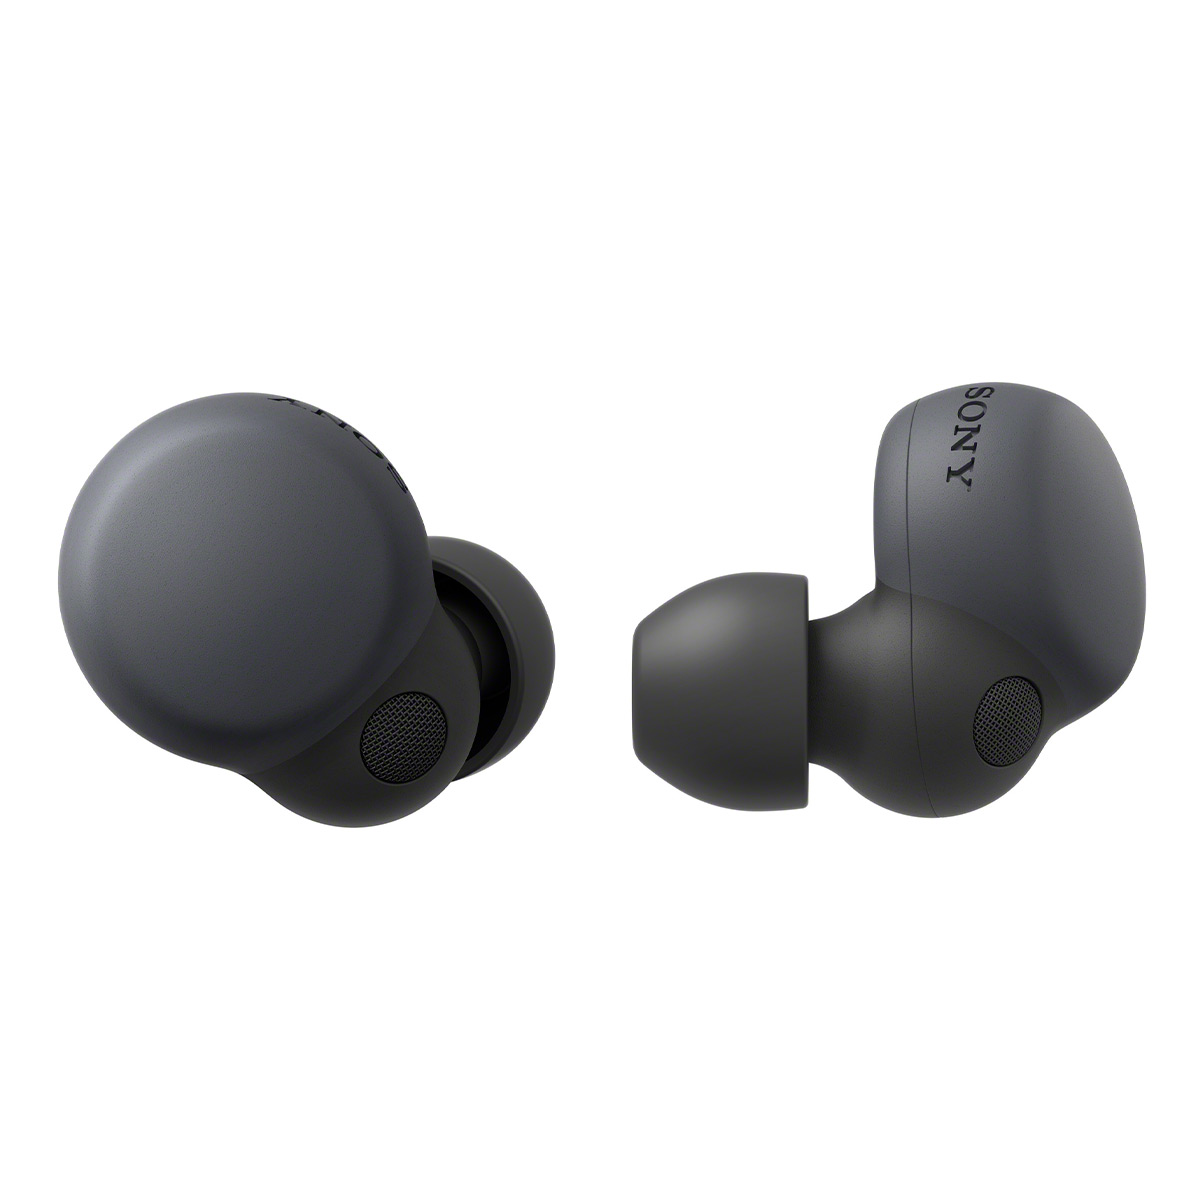 Sony WF-1000XM4 Noise-Canceling True Wireless In-Ear Headphones (Black) -  Water Resistant Earbuds with Exceptional Sound Quality and Superior Call